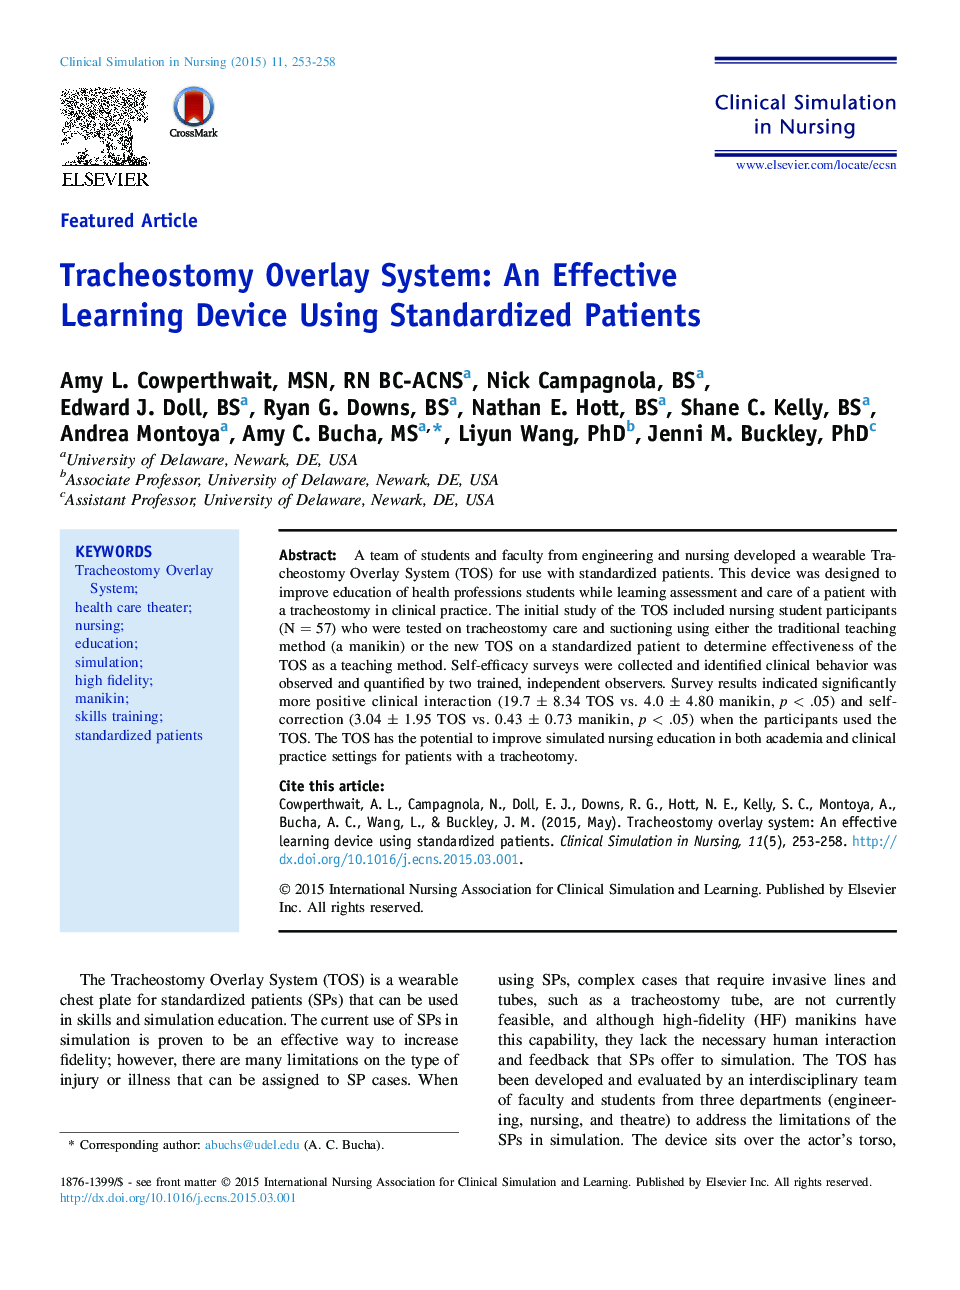 Tracheostomy Overlay System: An Effective Learning Device Using Standardized Patients